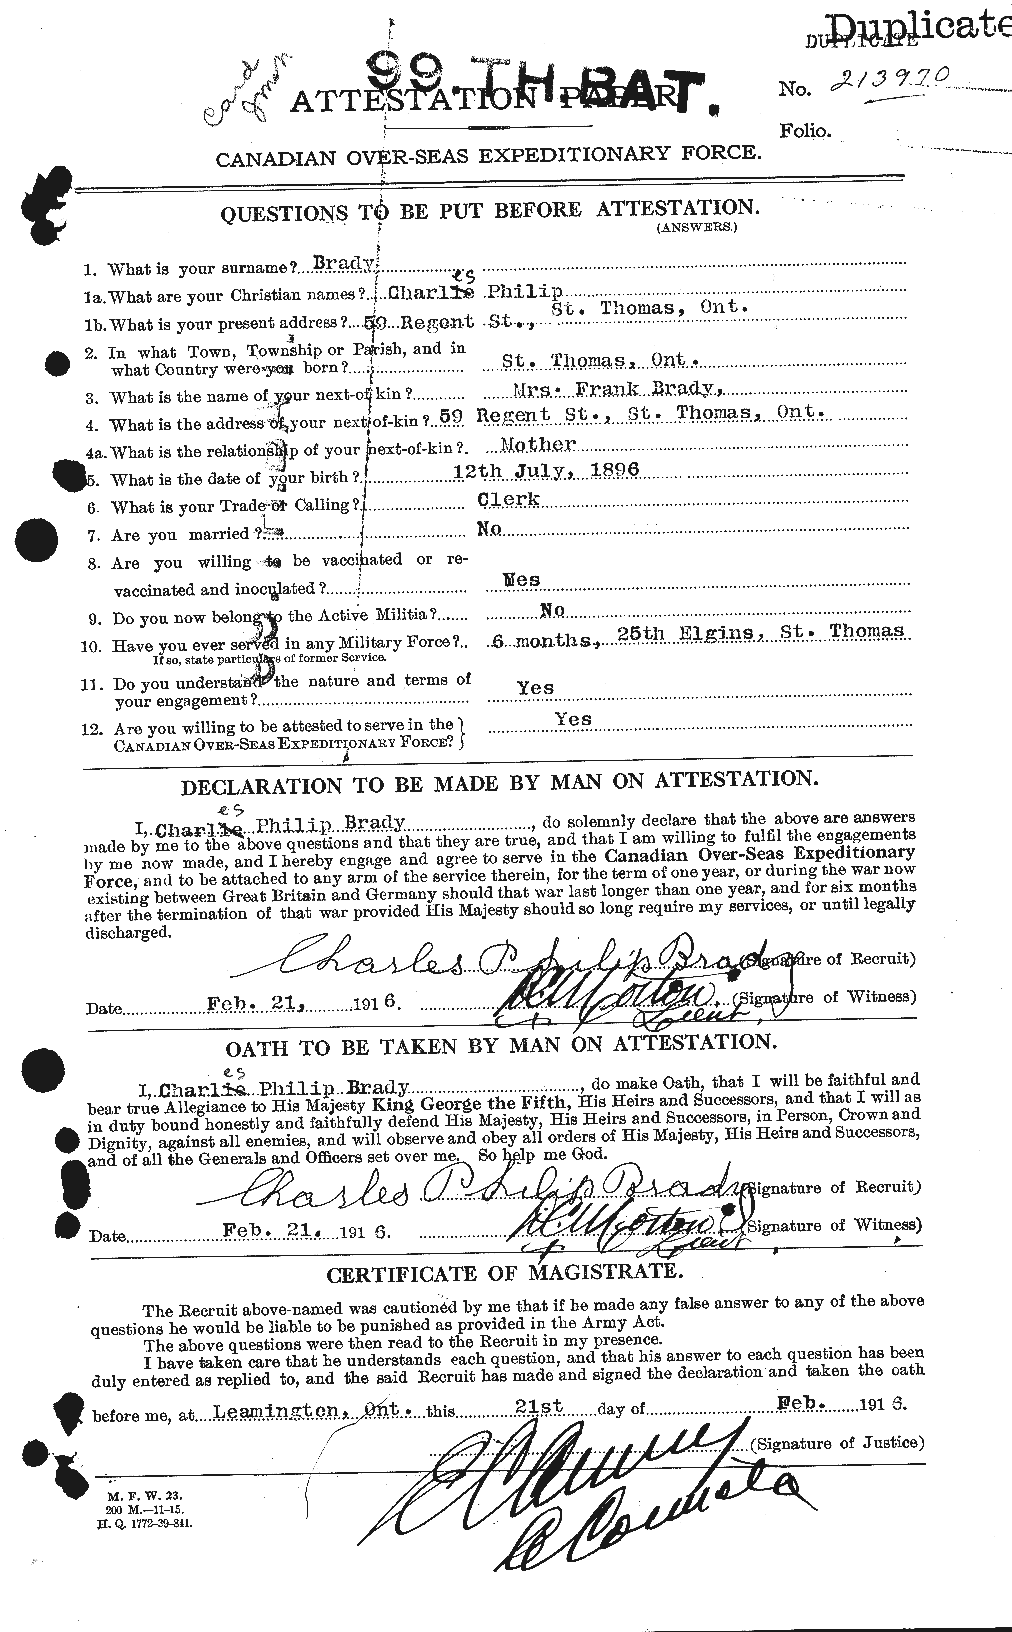 Personnel Records of the First World War - CEF 257124a